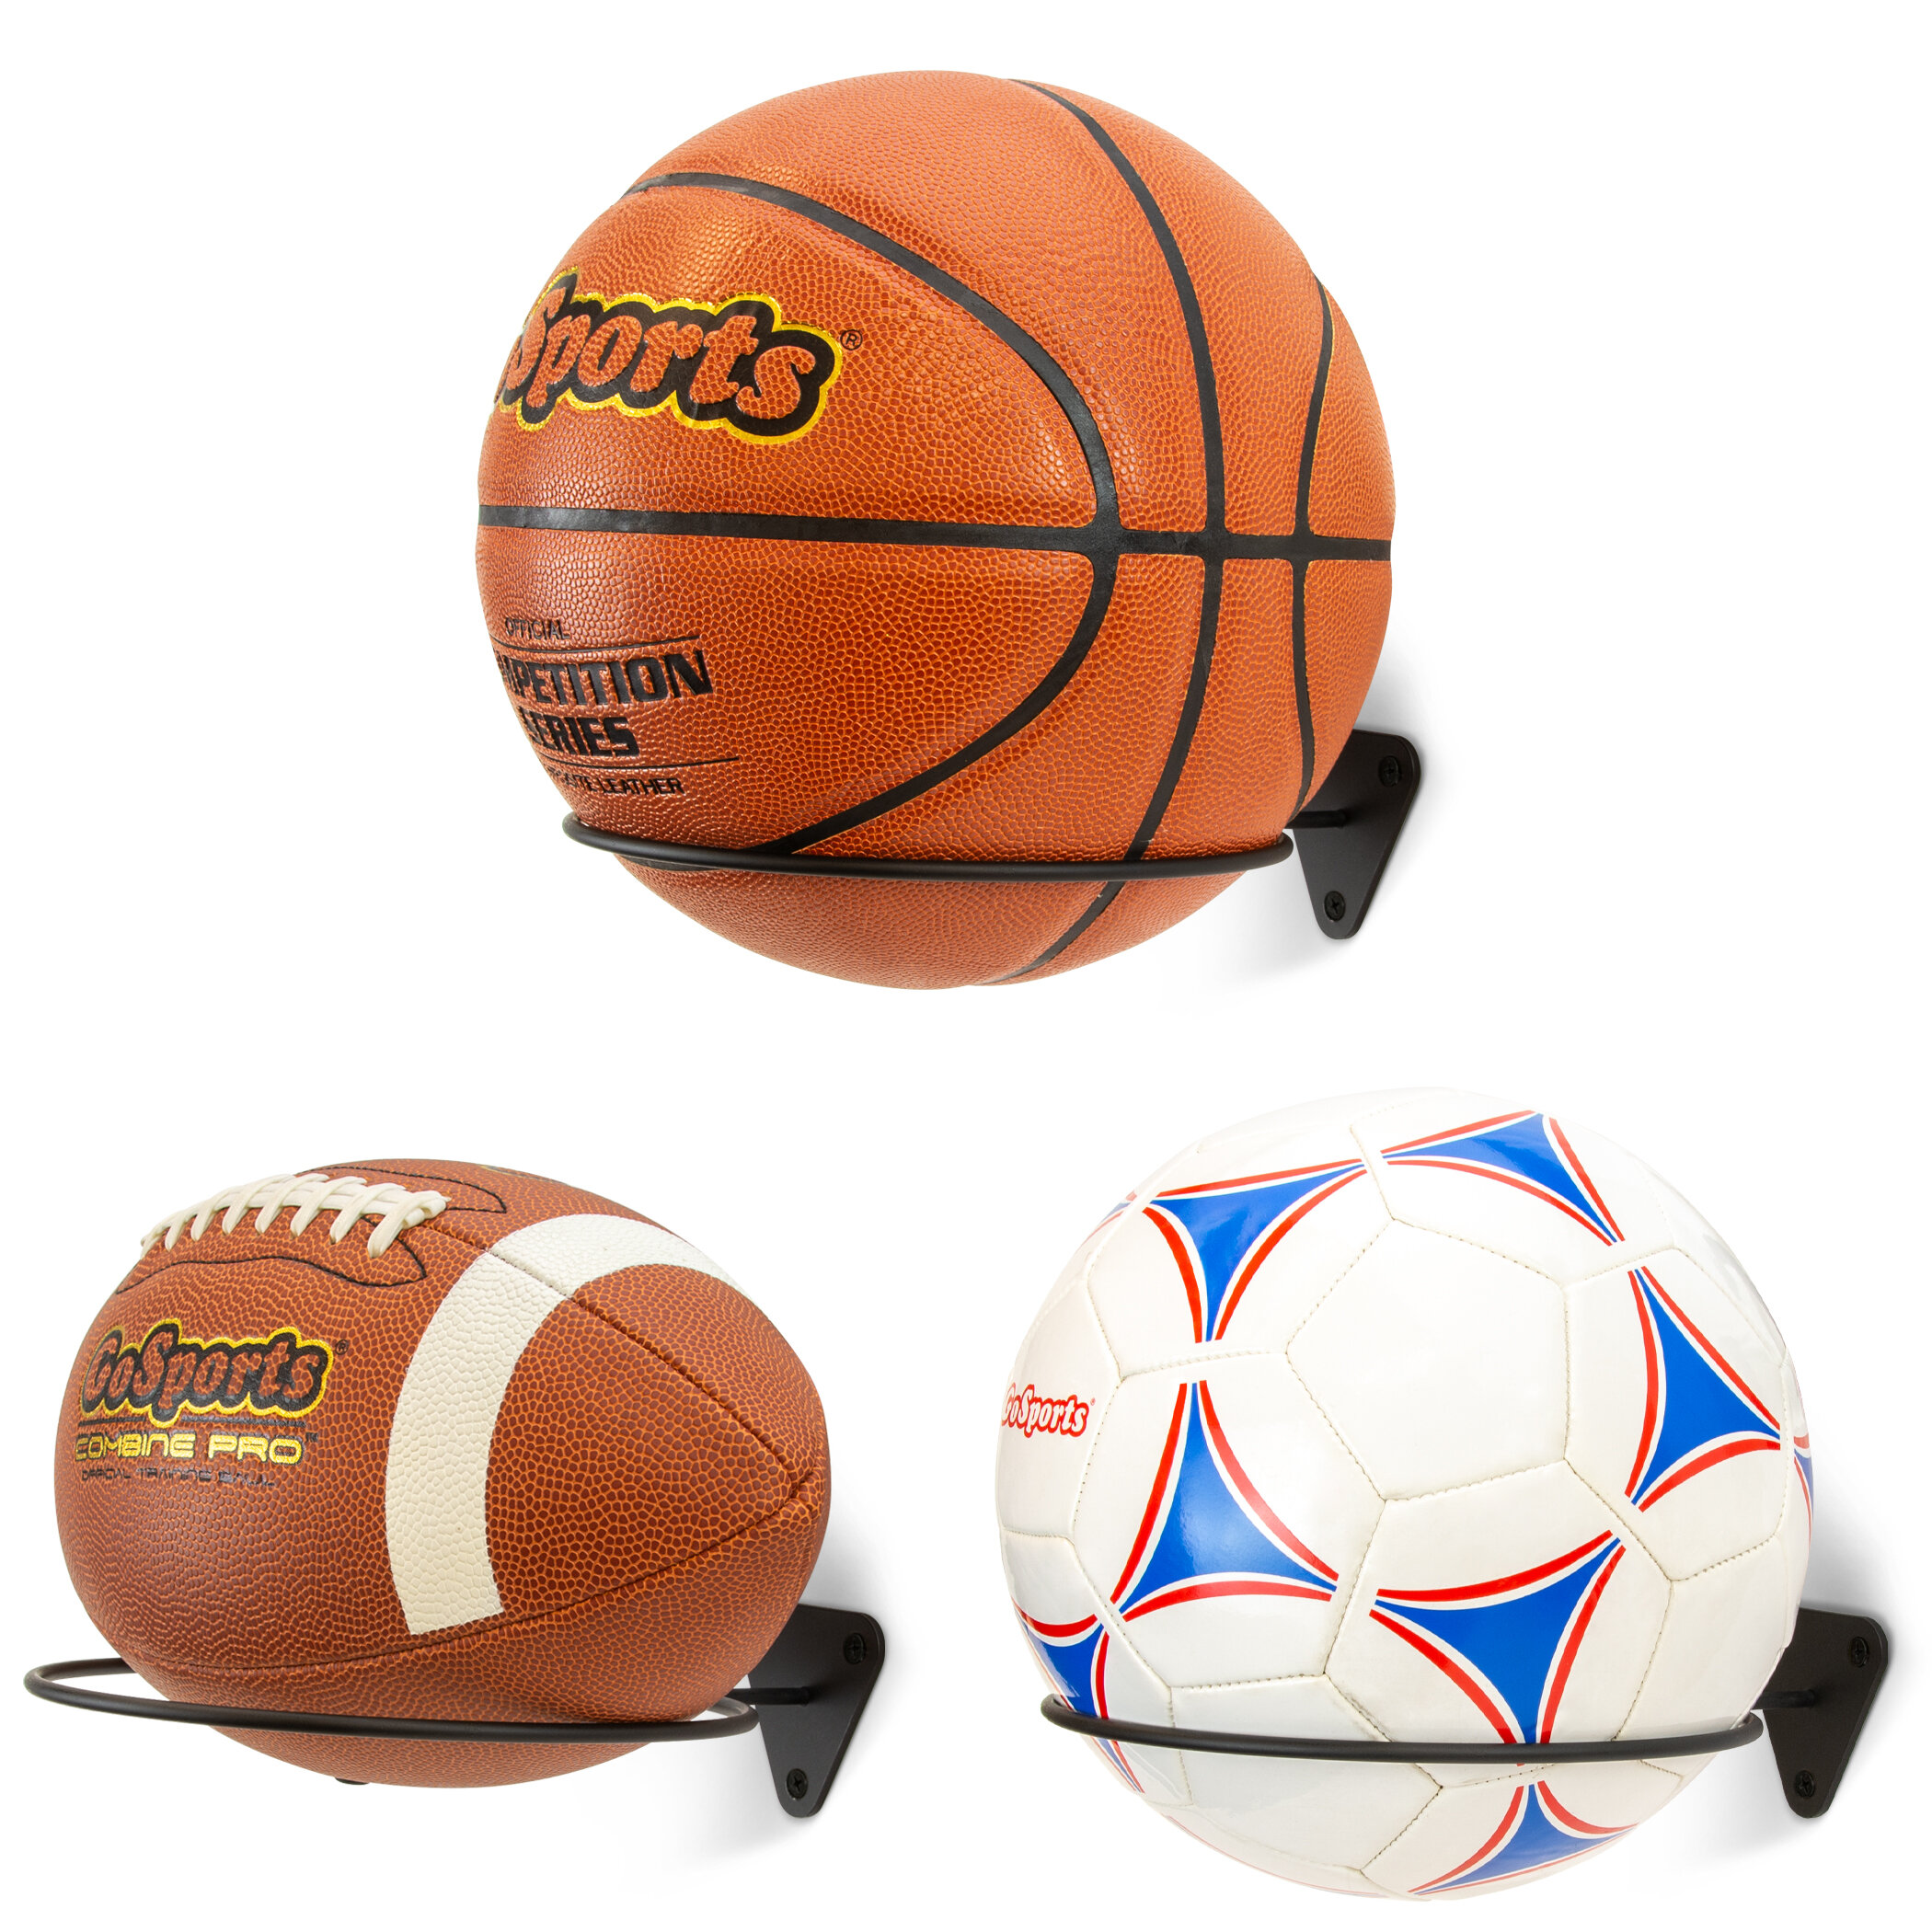 ~3 Round XLarge 2" Display Stand Basketball Soccer Volley Ball Balls 